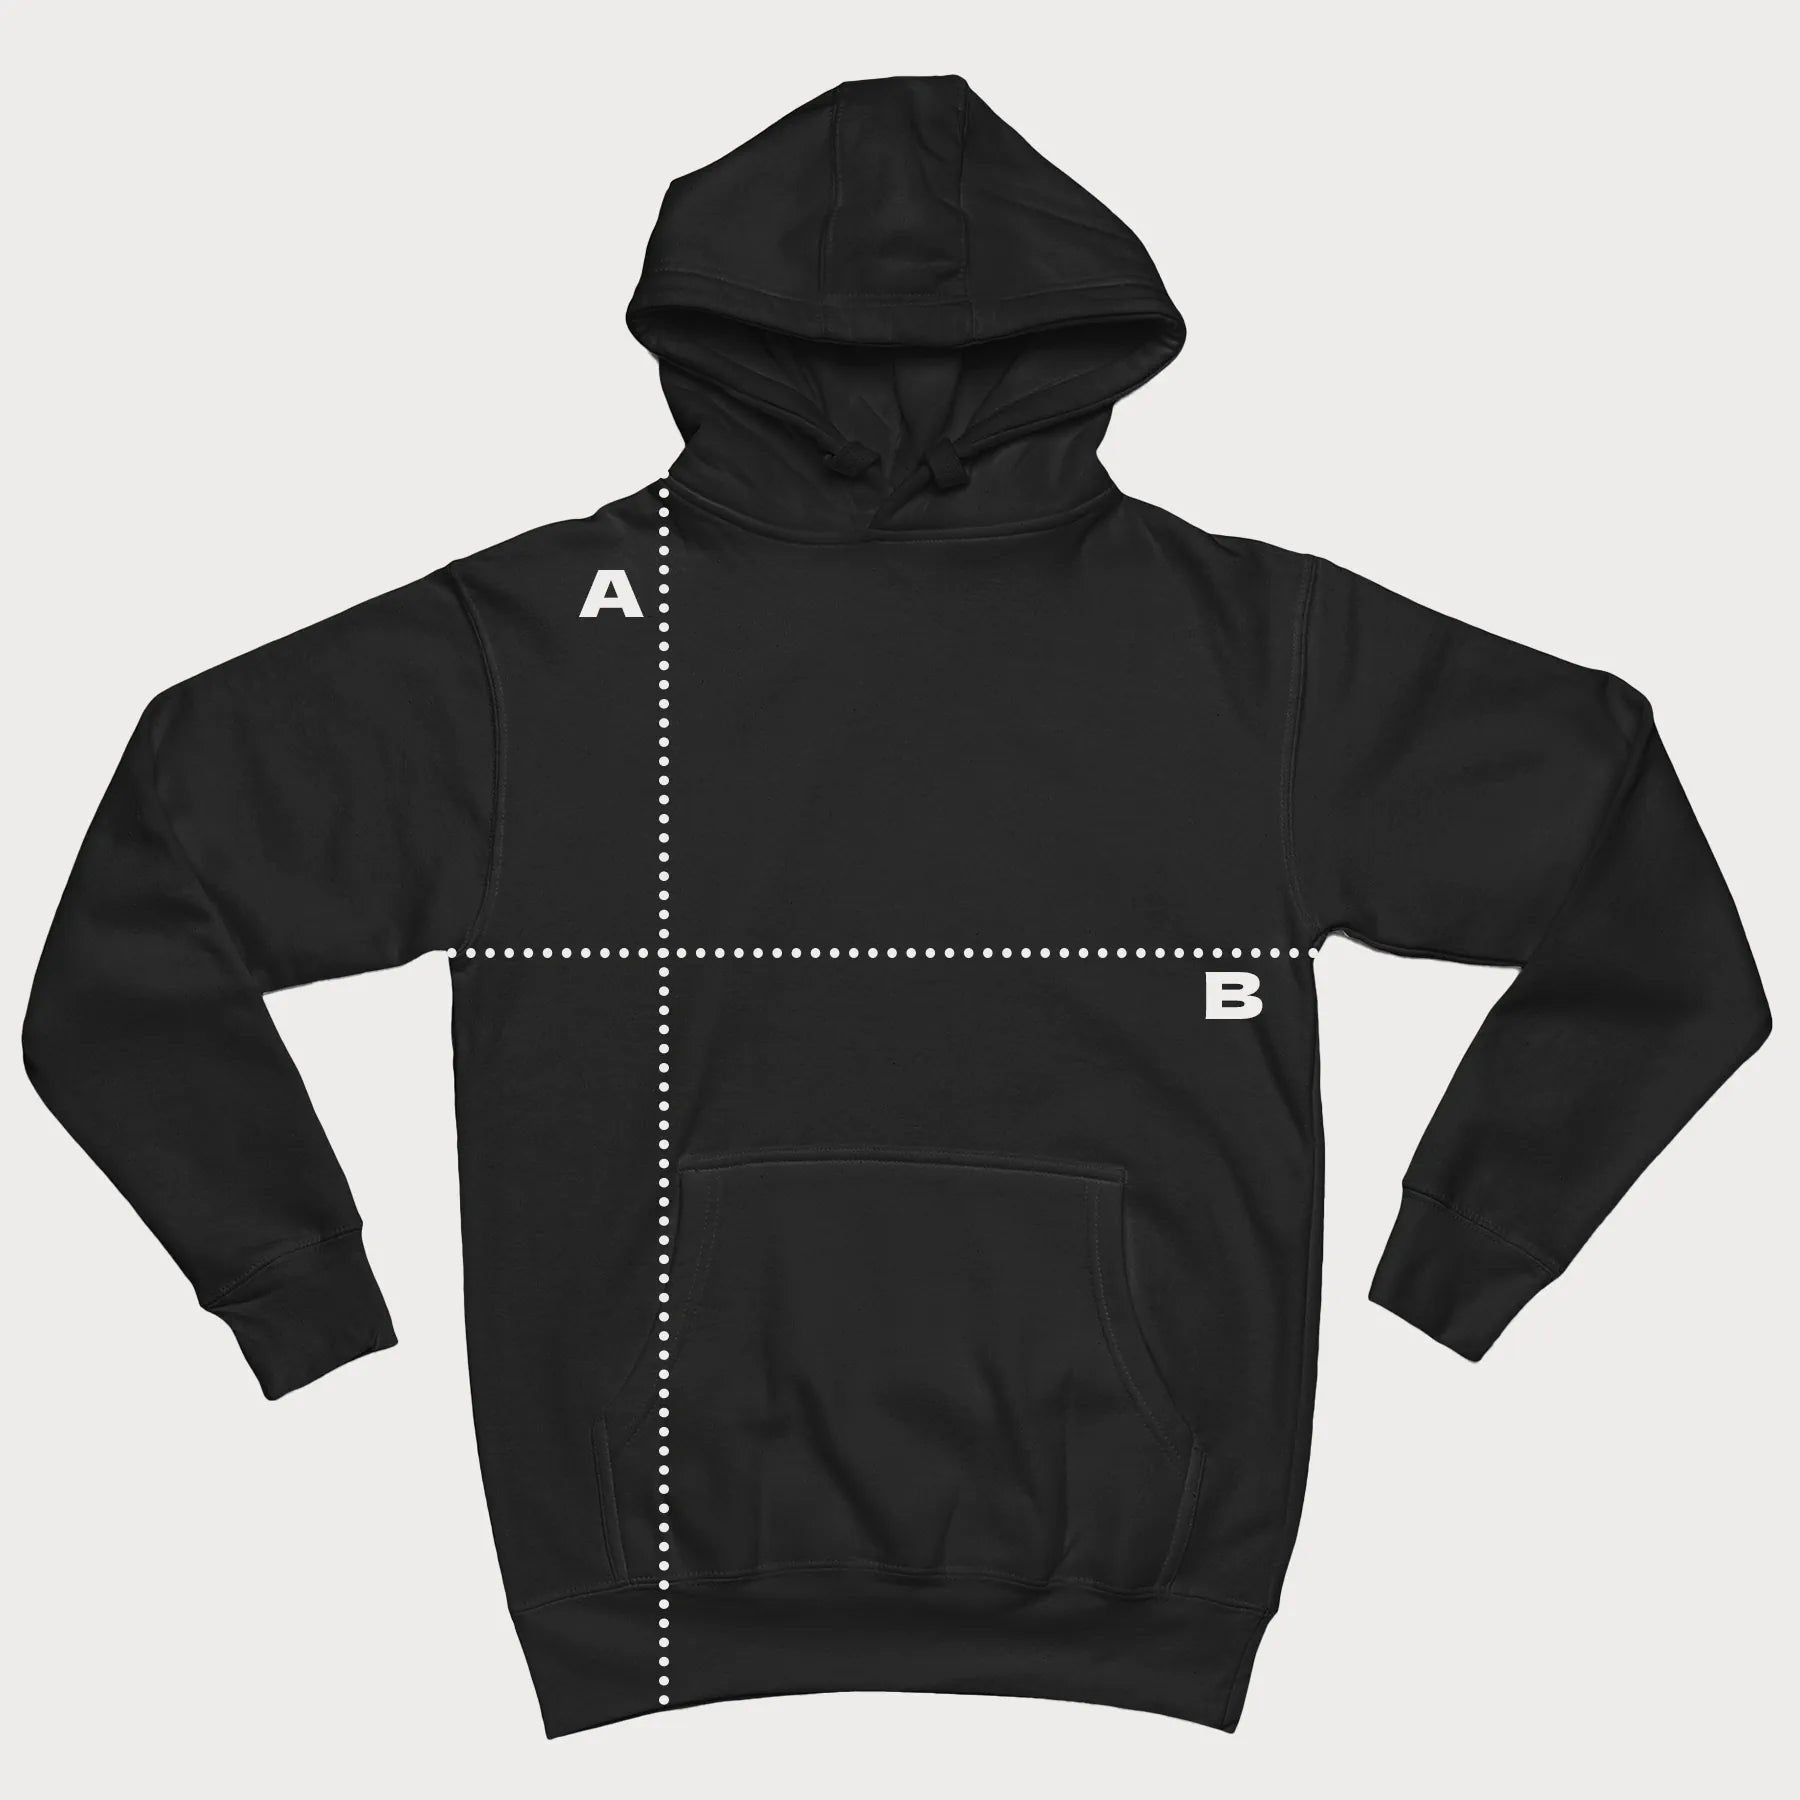 Size chart for hoodies on Hoodies Store